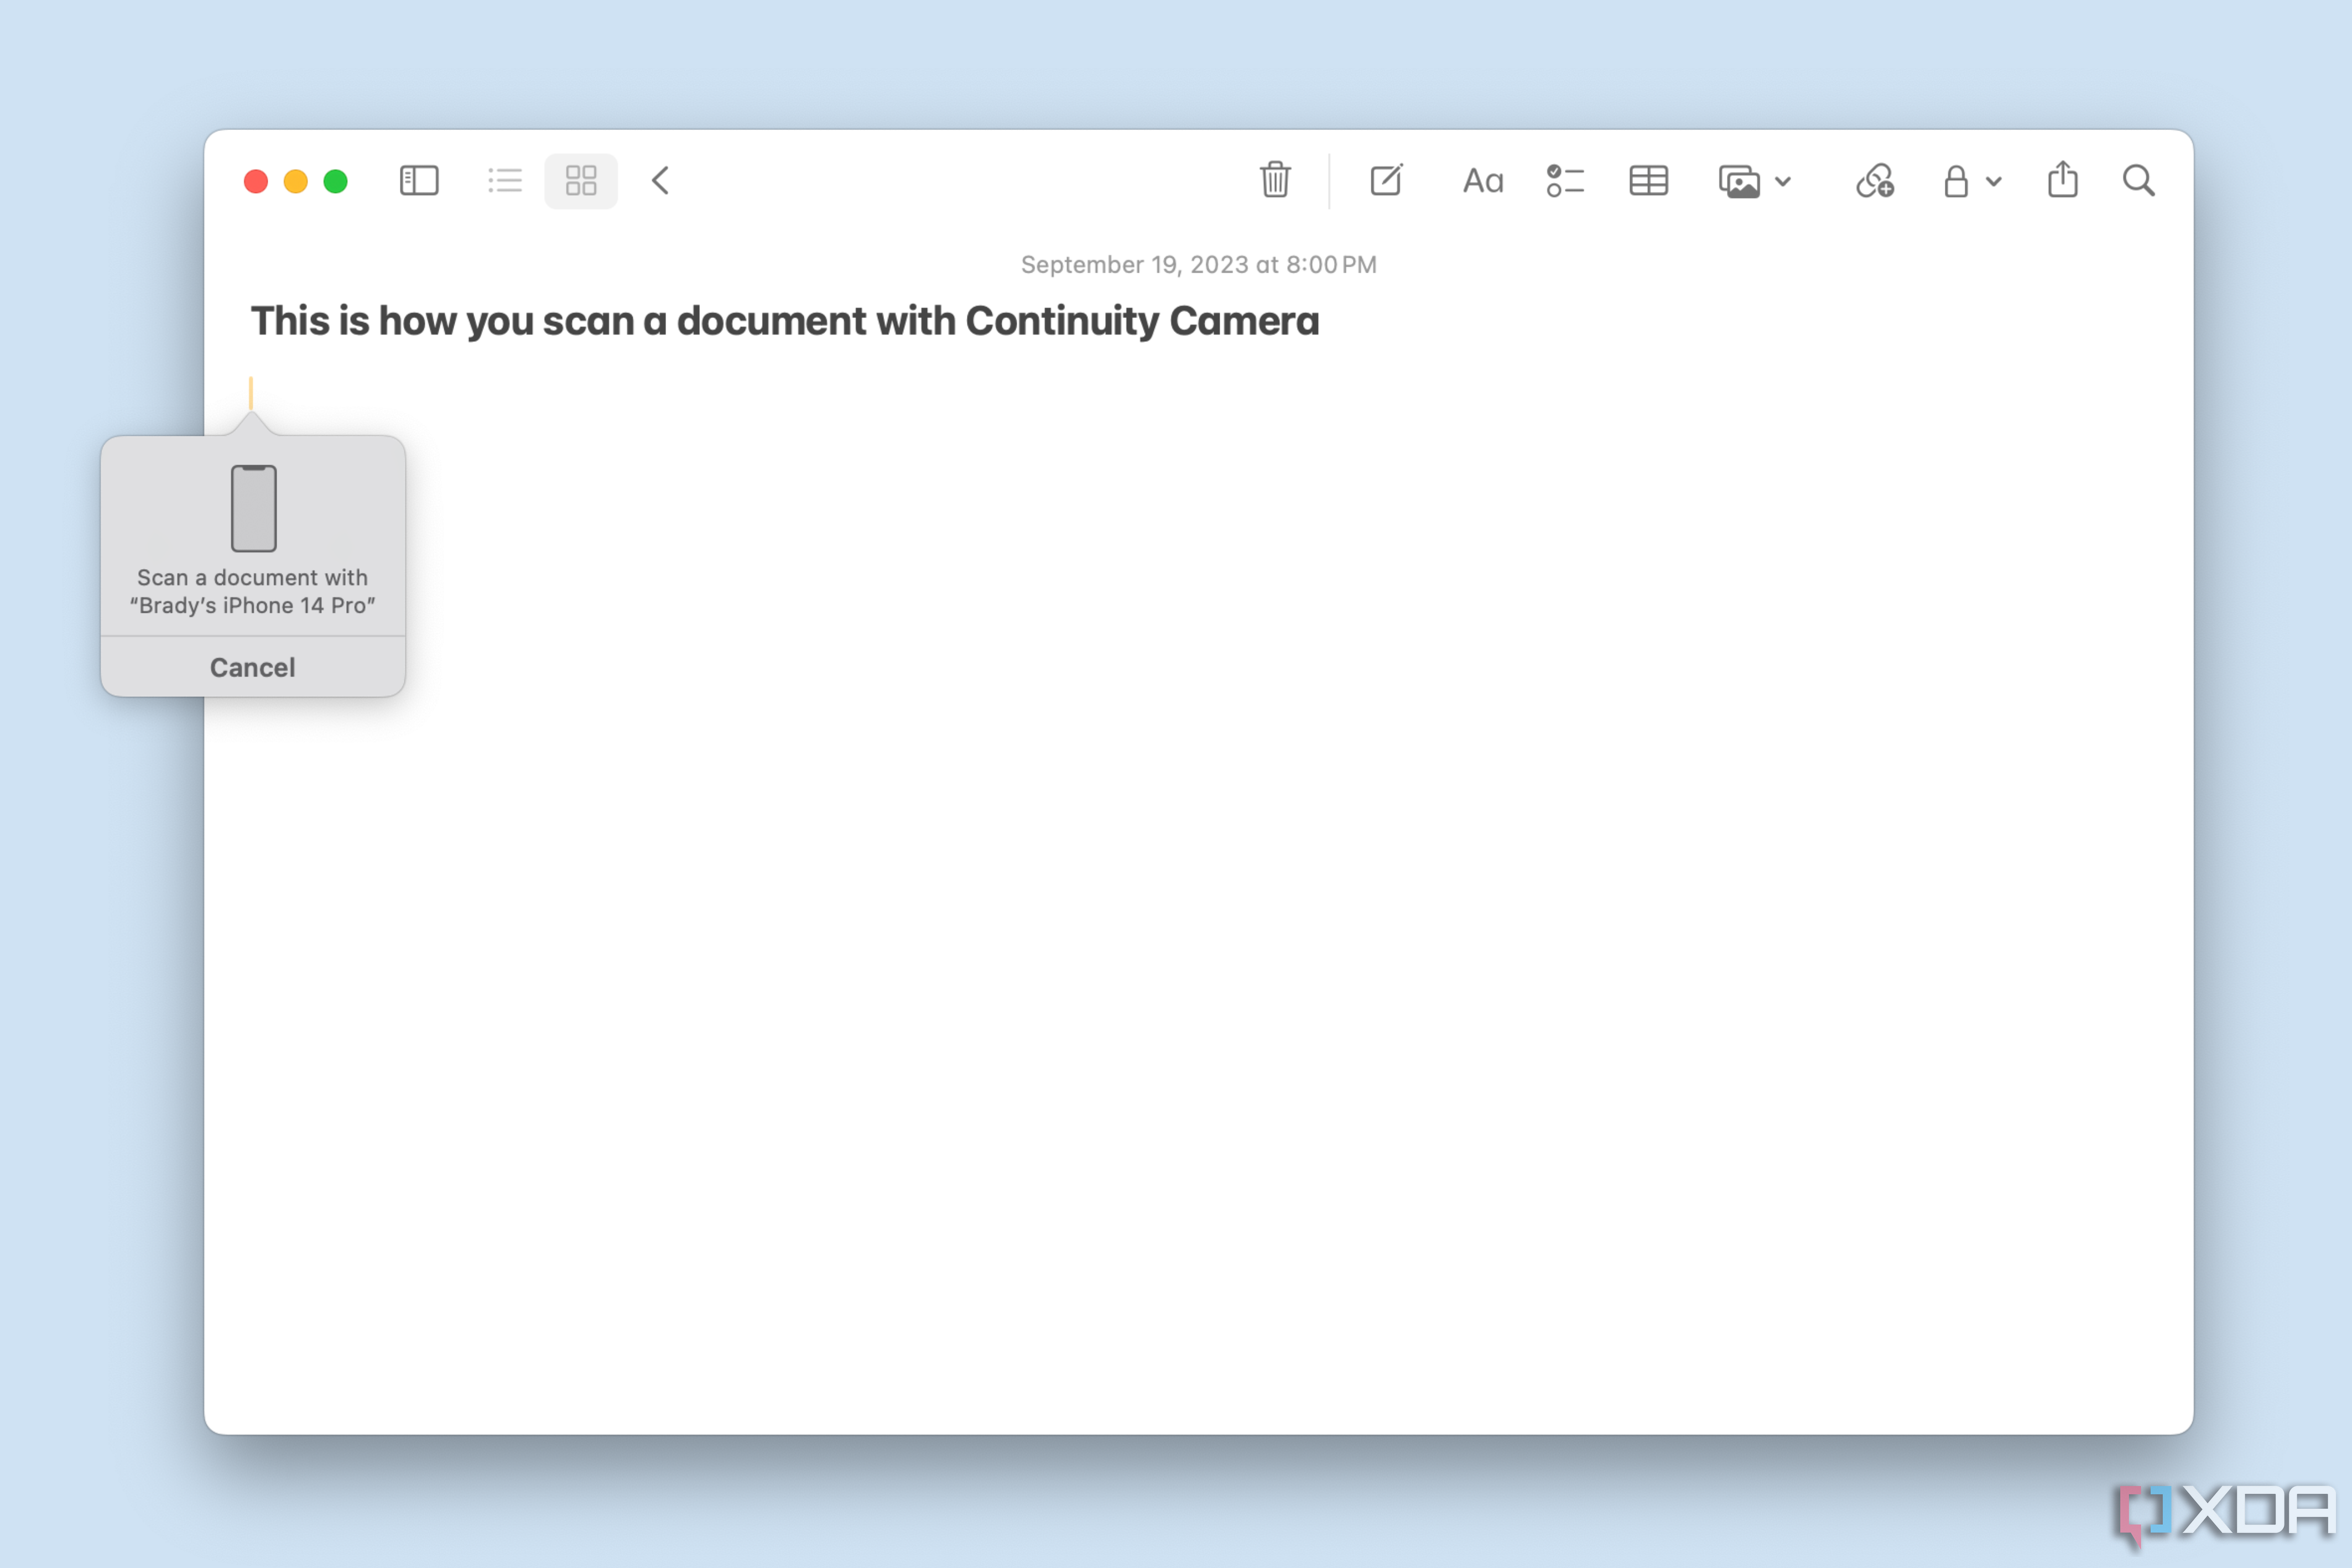 A screenshot mockup showing the process for scanning a document with Continuity Camera.